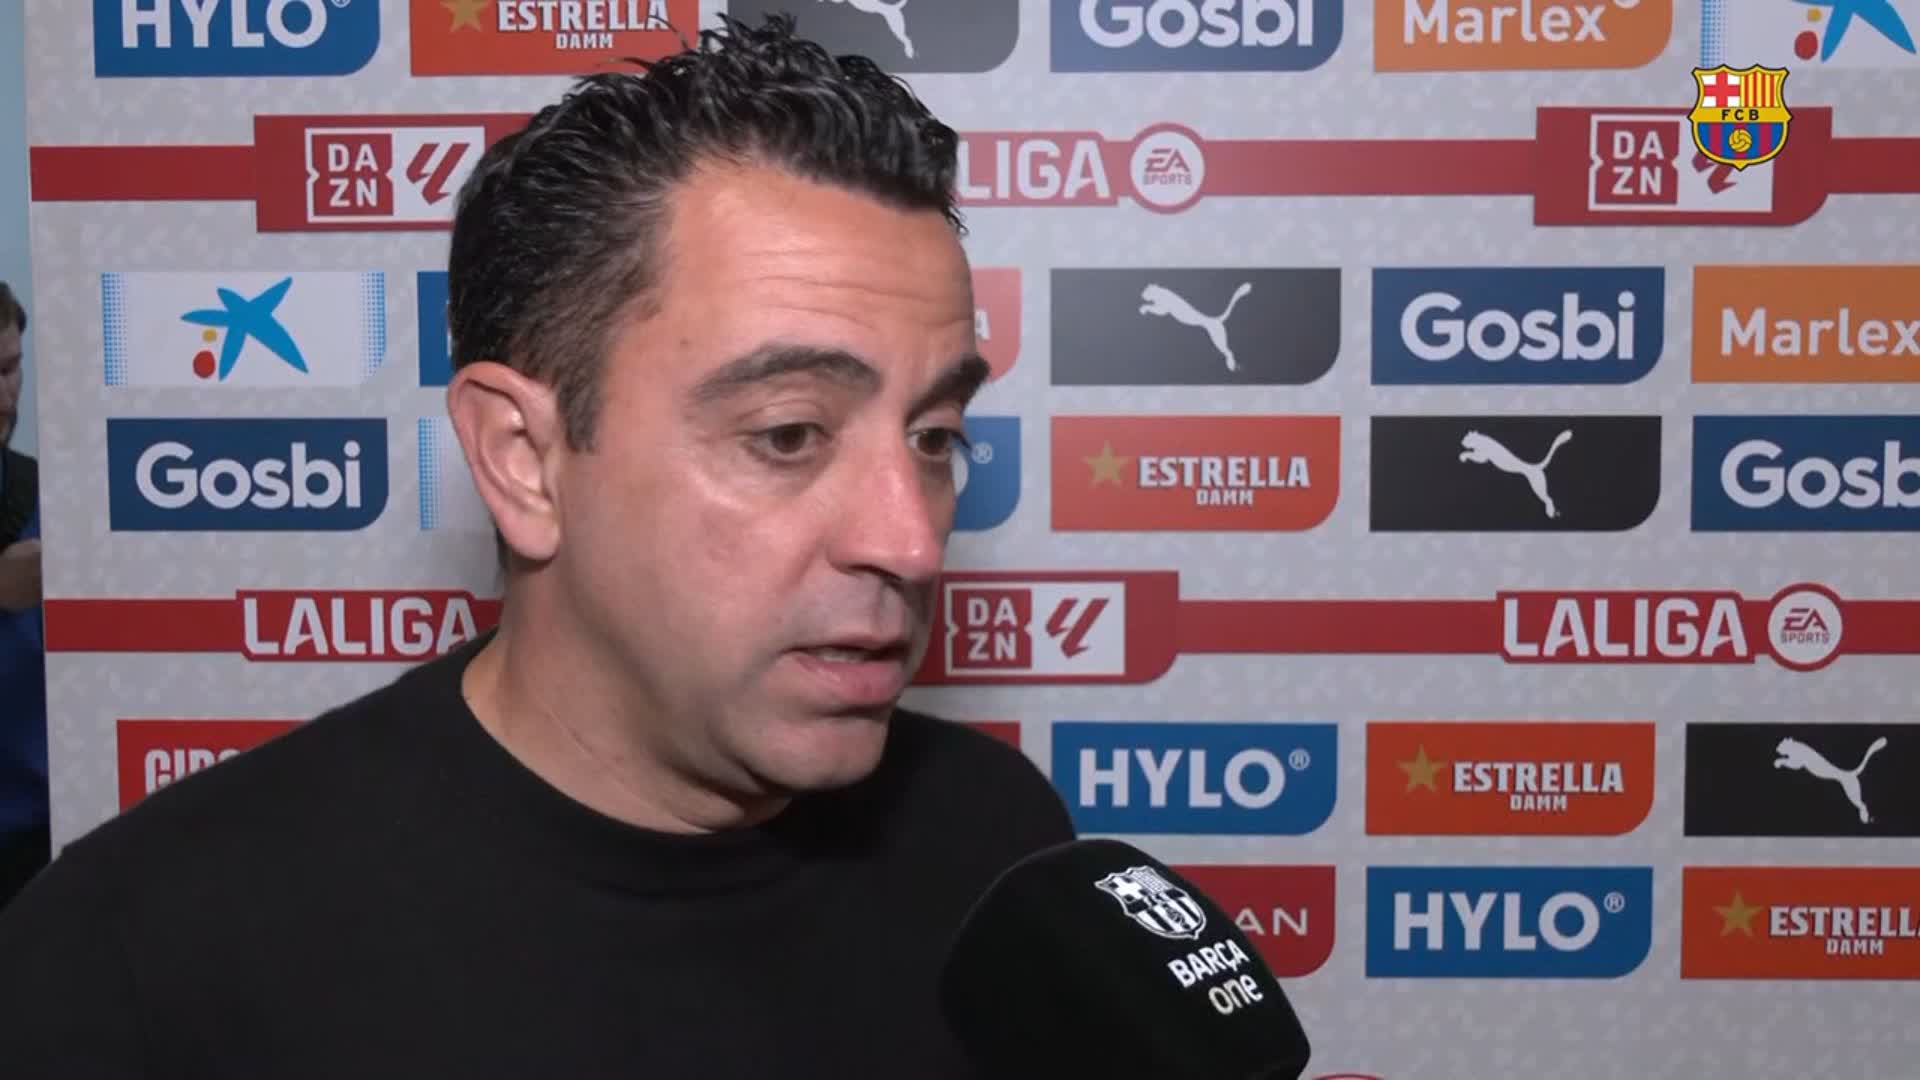 Xavi Hernandez has no plans to leave Barcelona in wake of disastrous Girona defeat